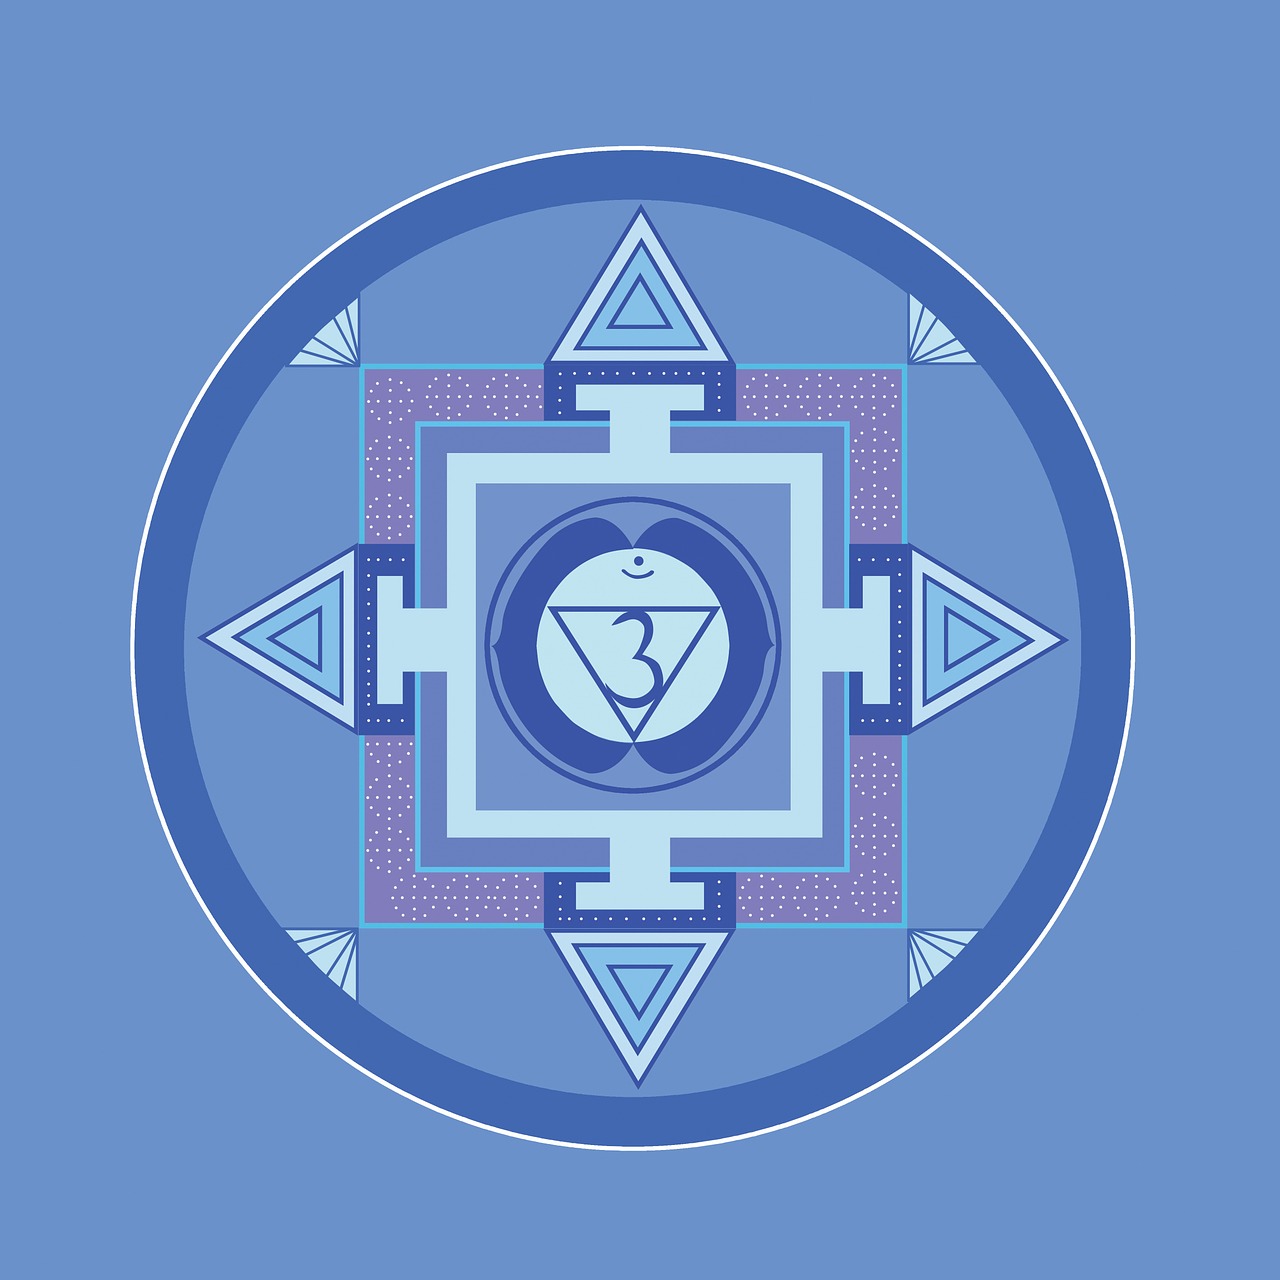 the seven chakrai symbols are arranged in a circle, an illustration of, symbolism, blue and violet color scheme, yantra, centered in panel, light-blue